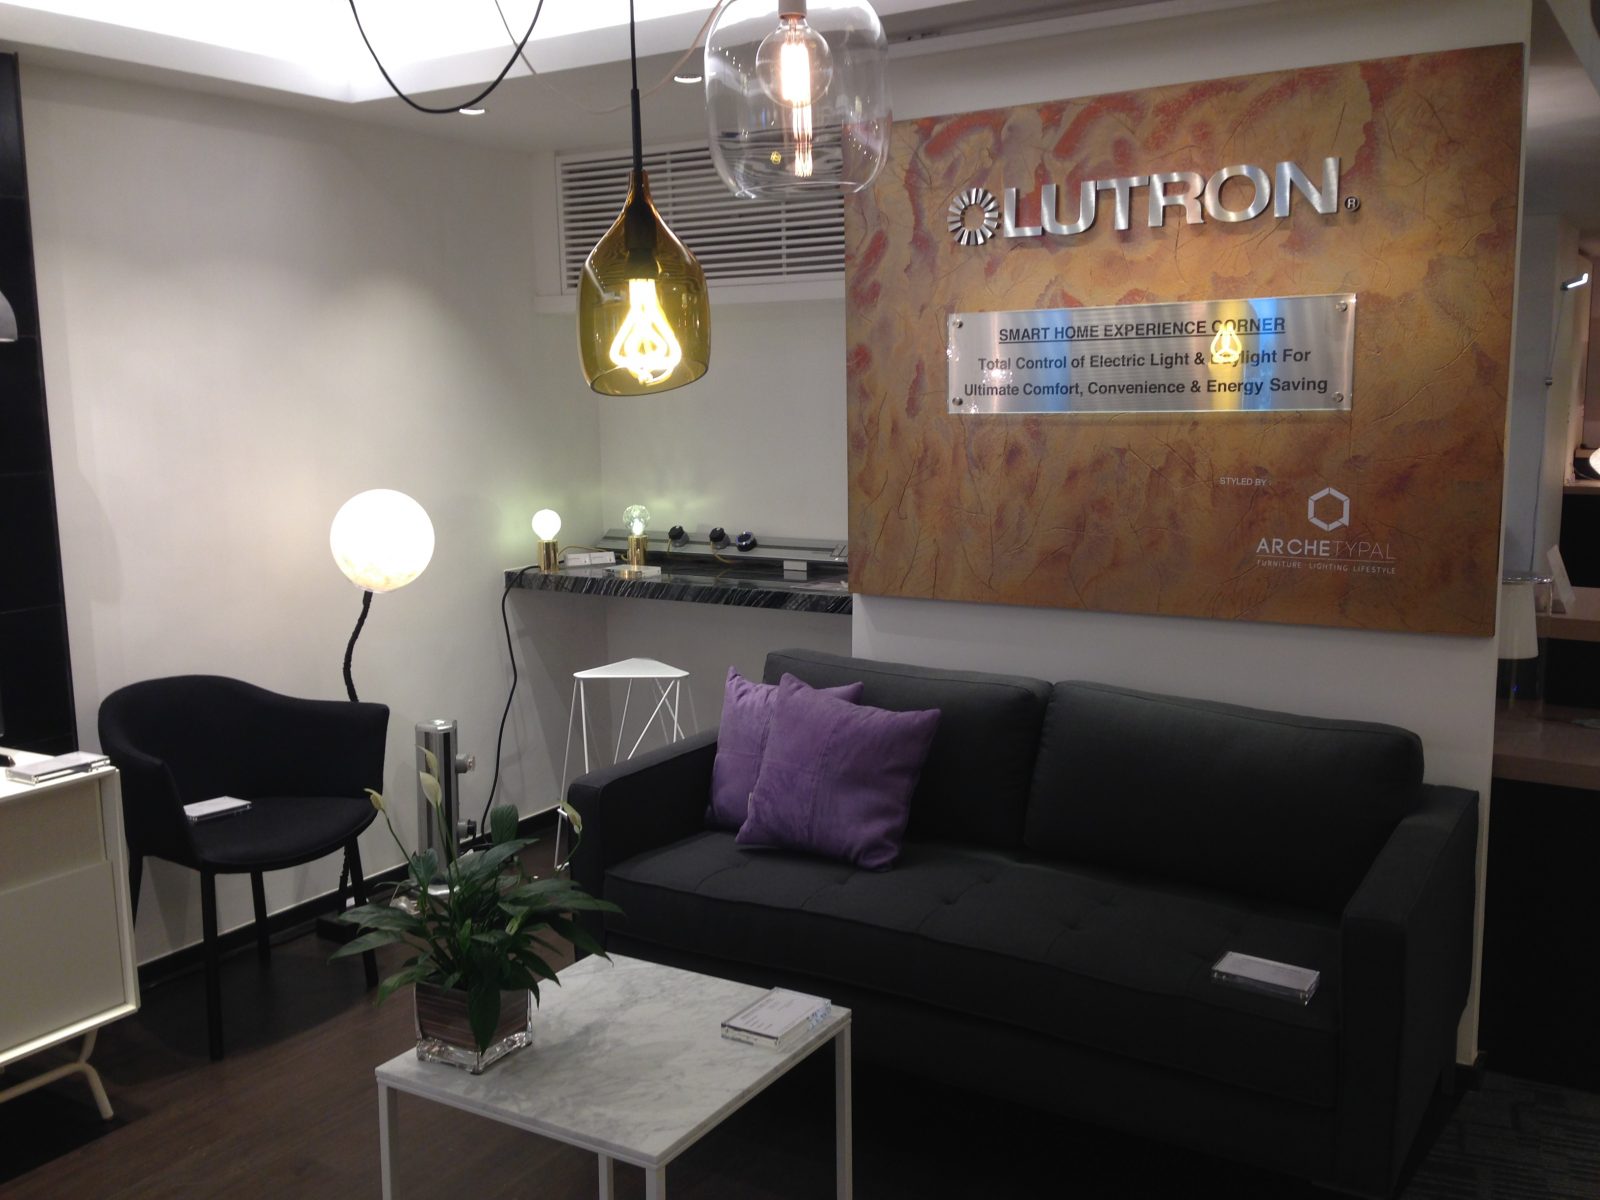 Special collaboration with Lutron and Zodiac